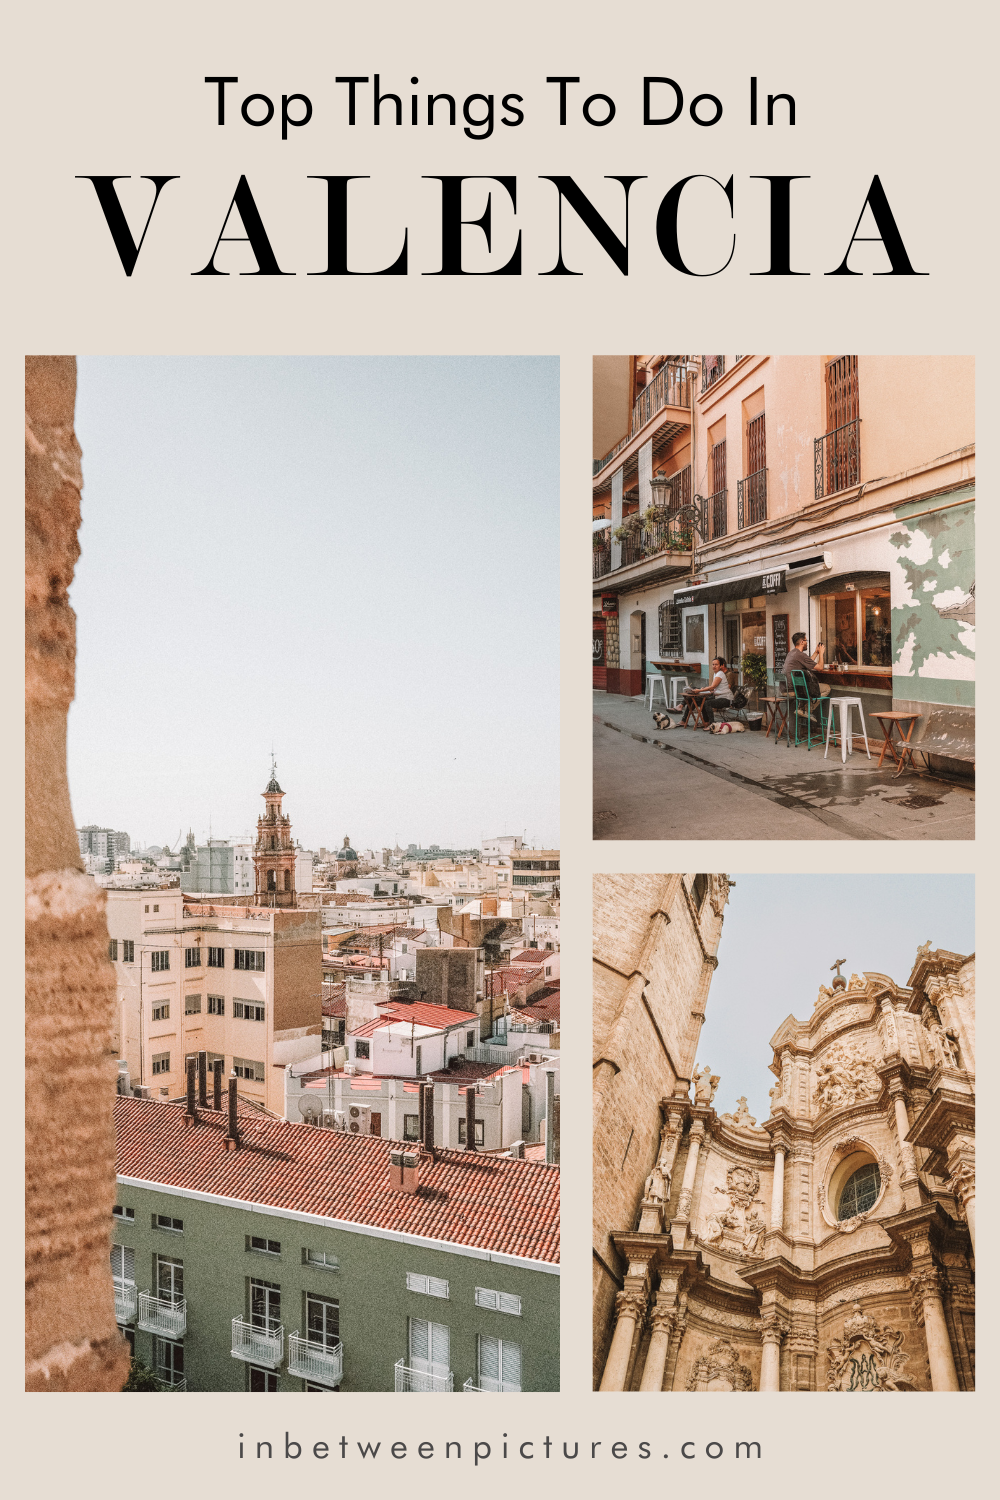 3 Days in Valencia Itinerary - Perfect 3-day Itinerary in Valencia Spain, Top things to do in Valencia, Where to eat in Valencia, What to do in Valencia, Food guide to Valencia